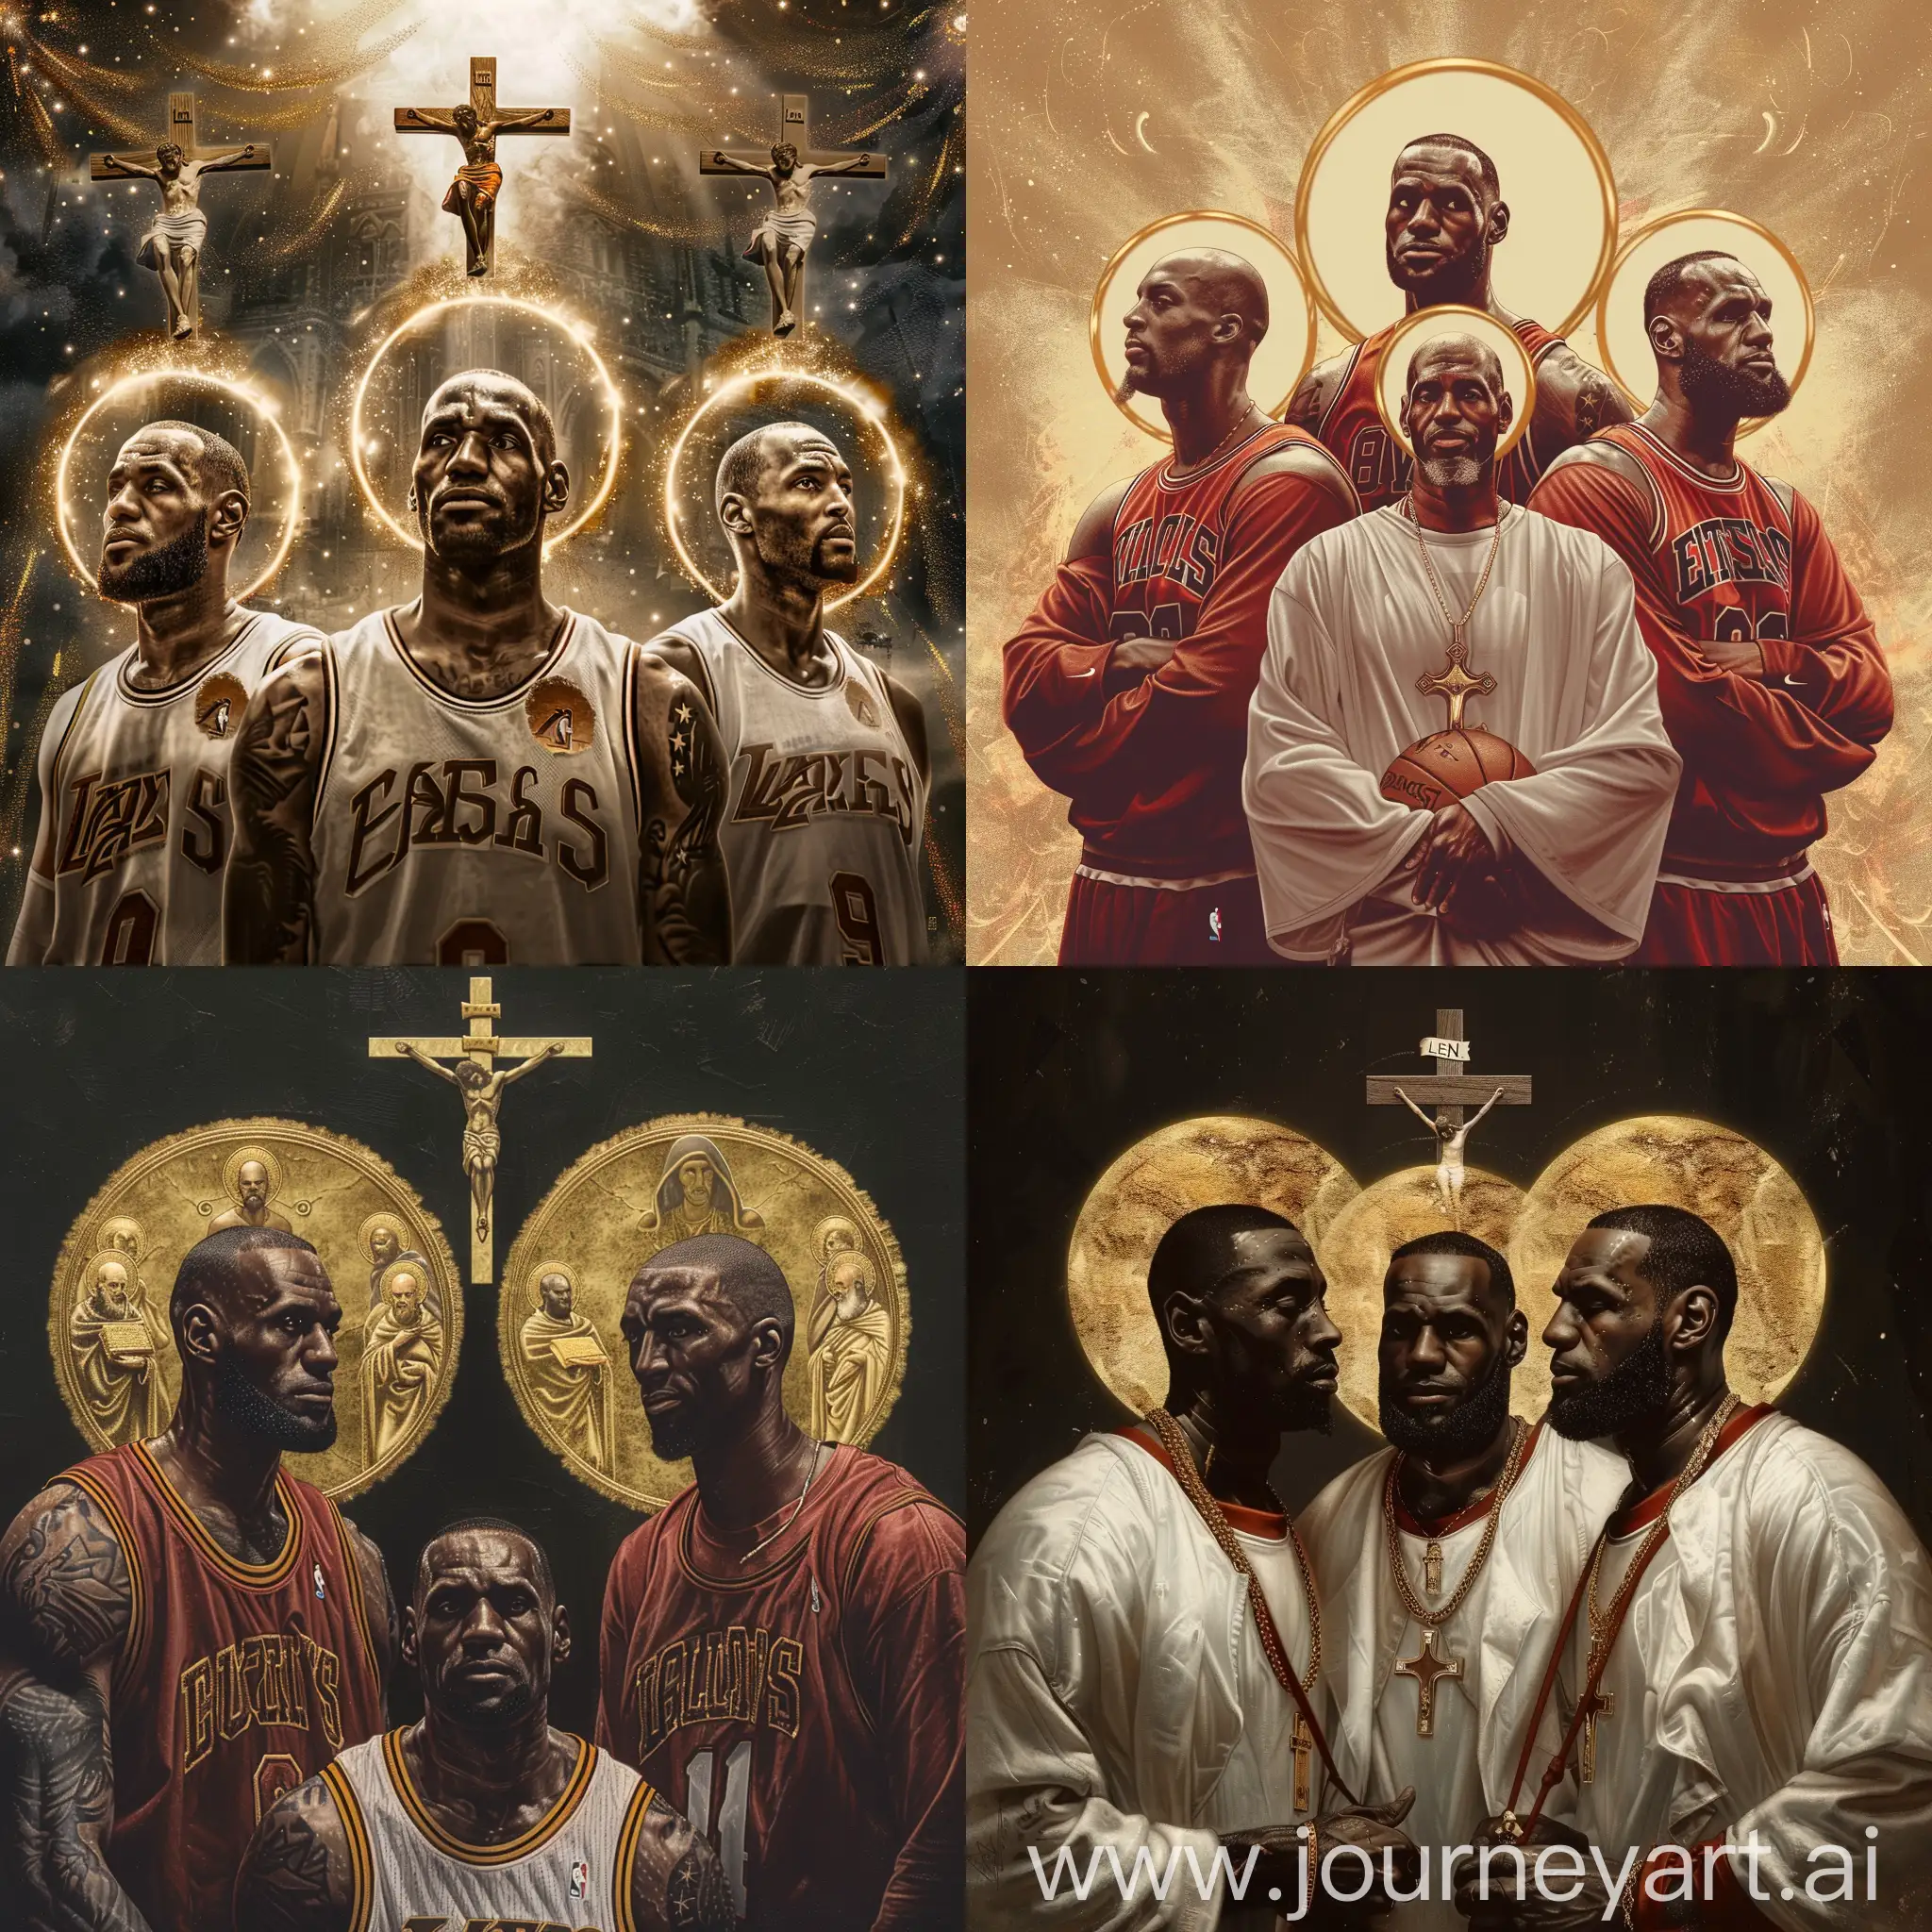 Legendary-Basketball-Players-as-Catholic-Saints-with-Halos-and-Crosses